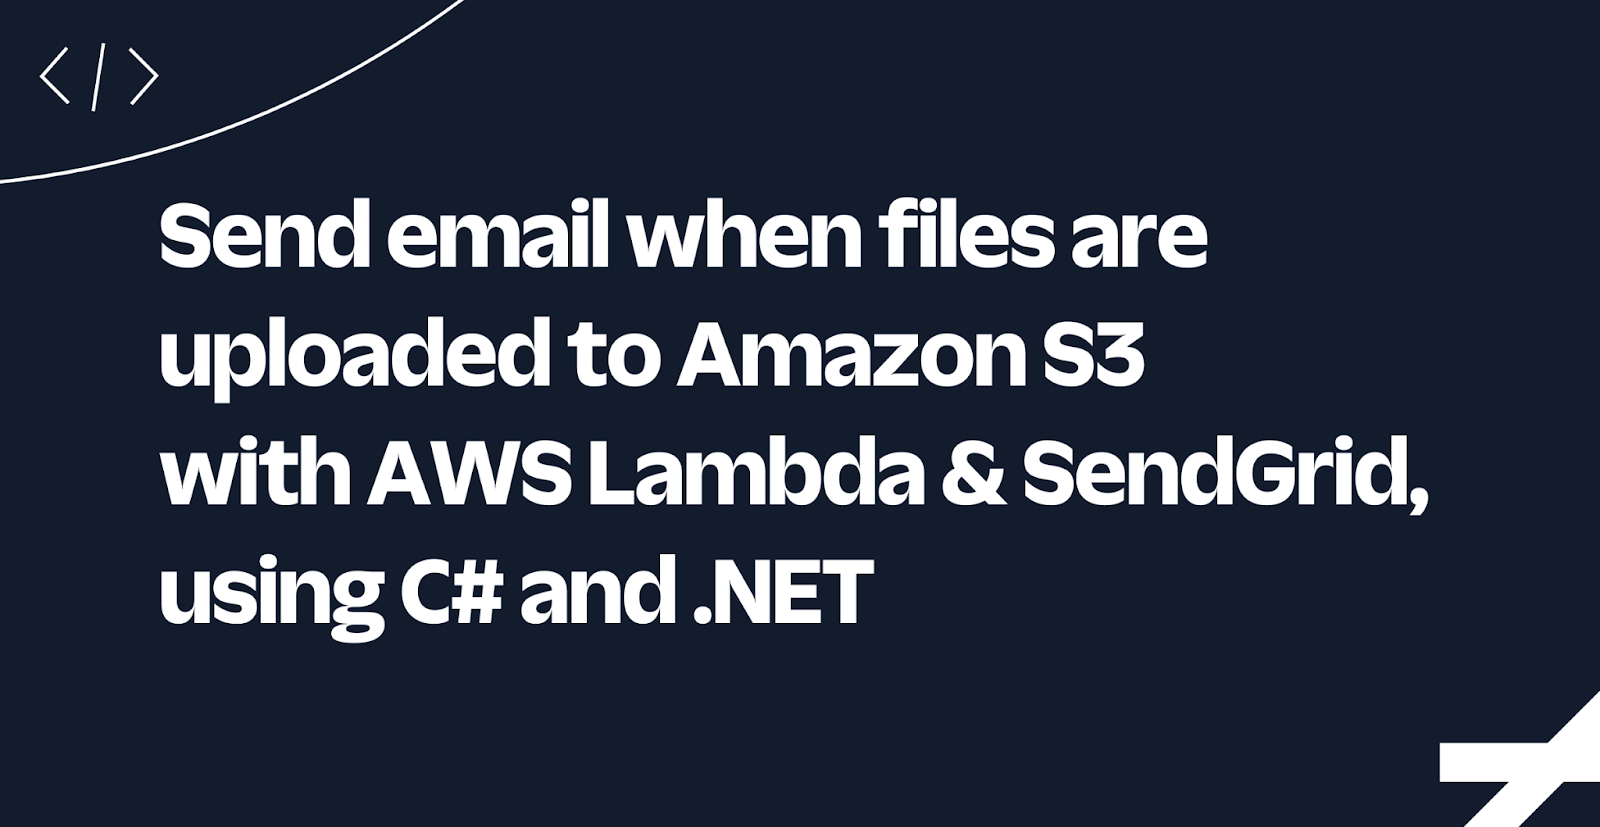 Send email when files are uploaded to Amazon S3  with AWS Lambda & SendGrid, using C# and .NET